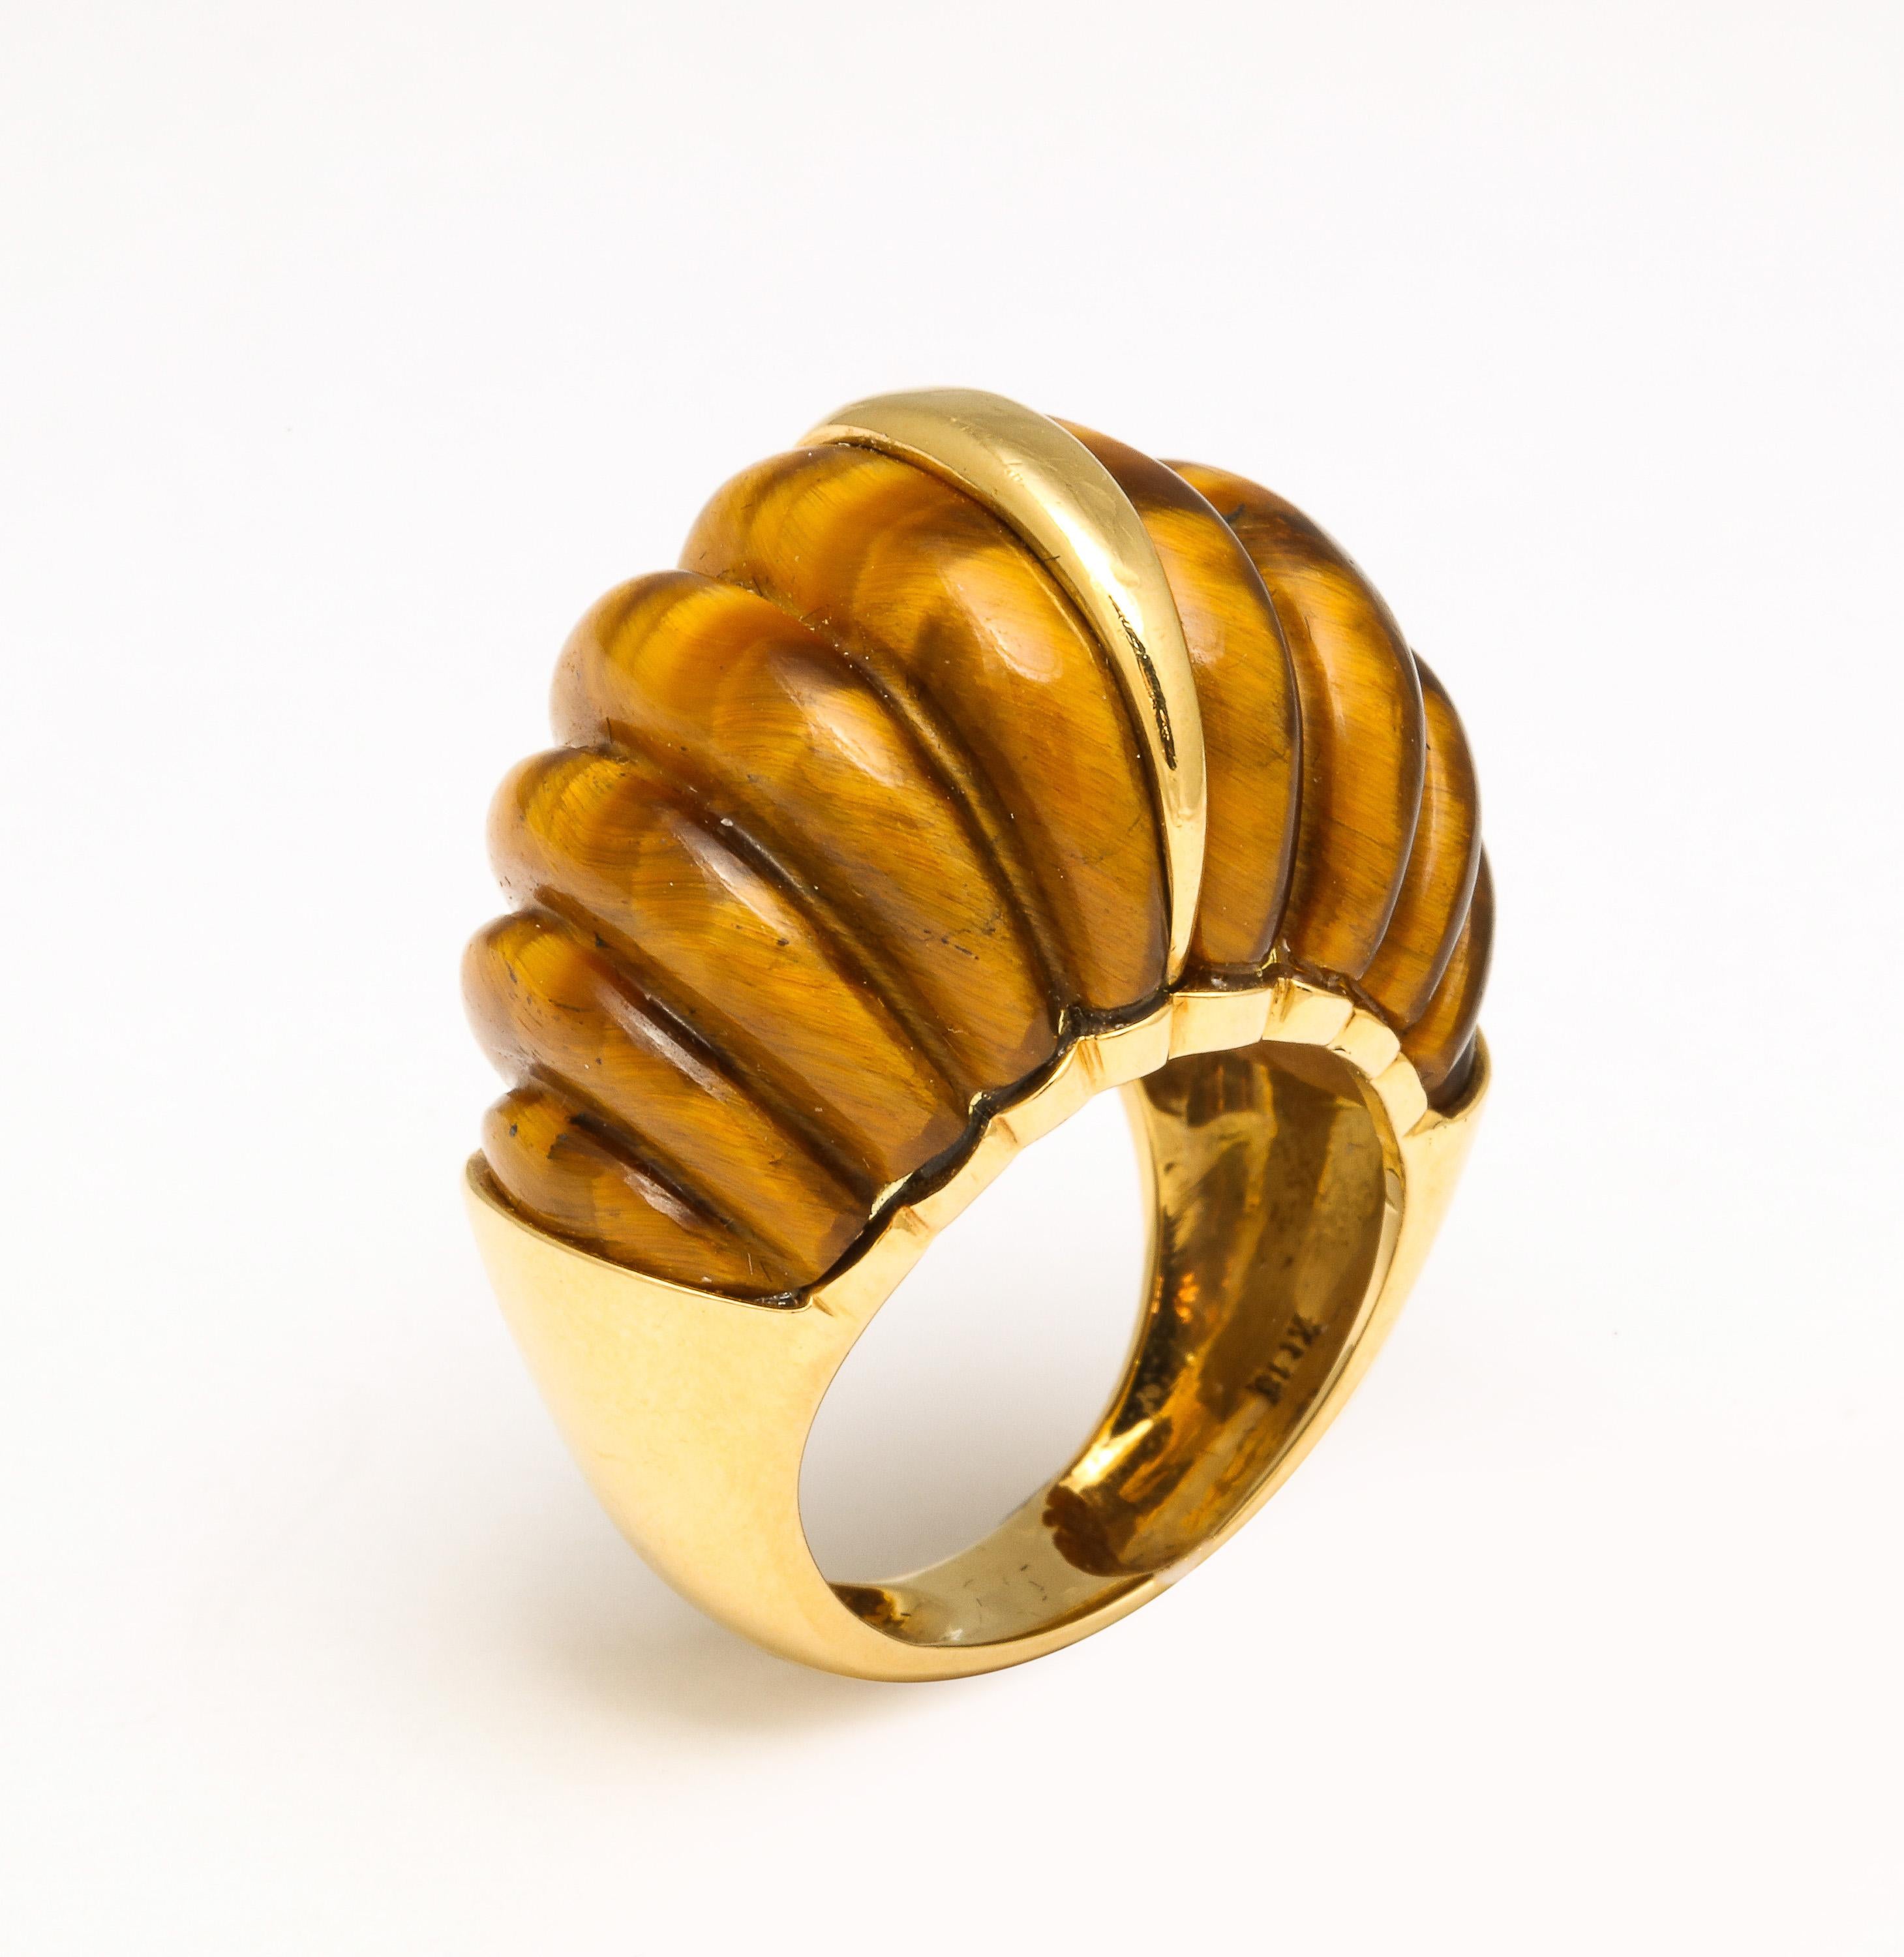 Women's Tiger's Eye Melon Shaped Ring with Center Gold Bar For Sale